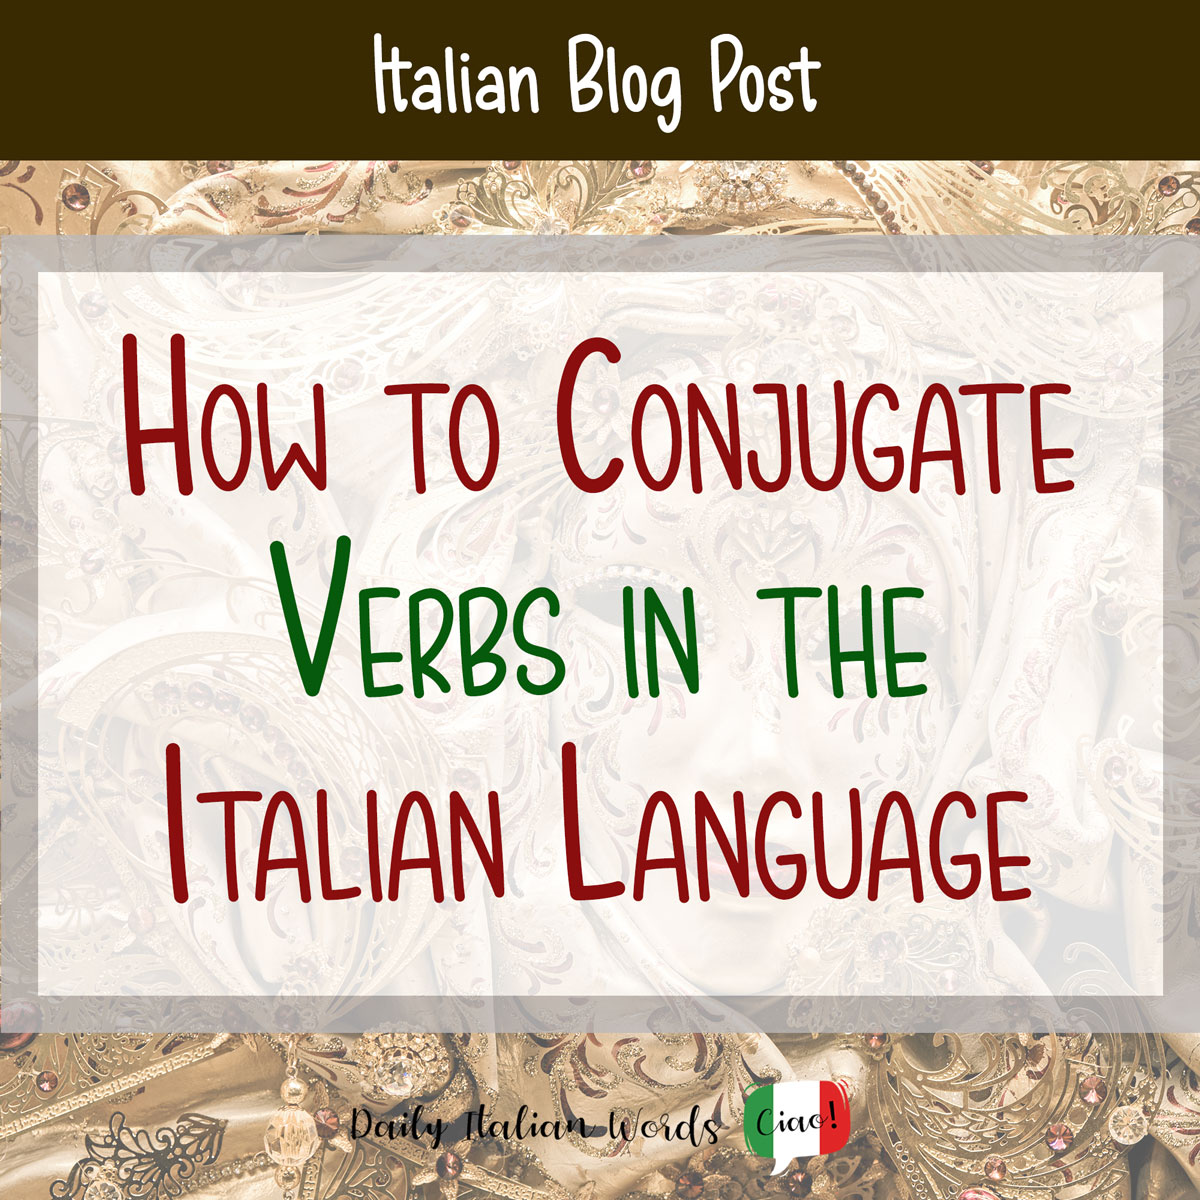 The best way to Conjugate Verbs within the Italian Language